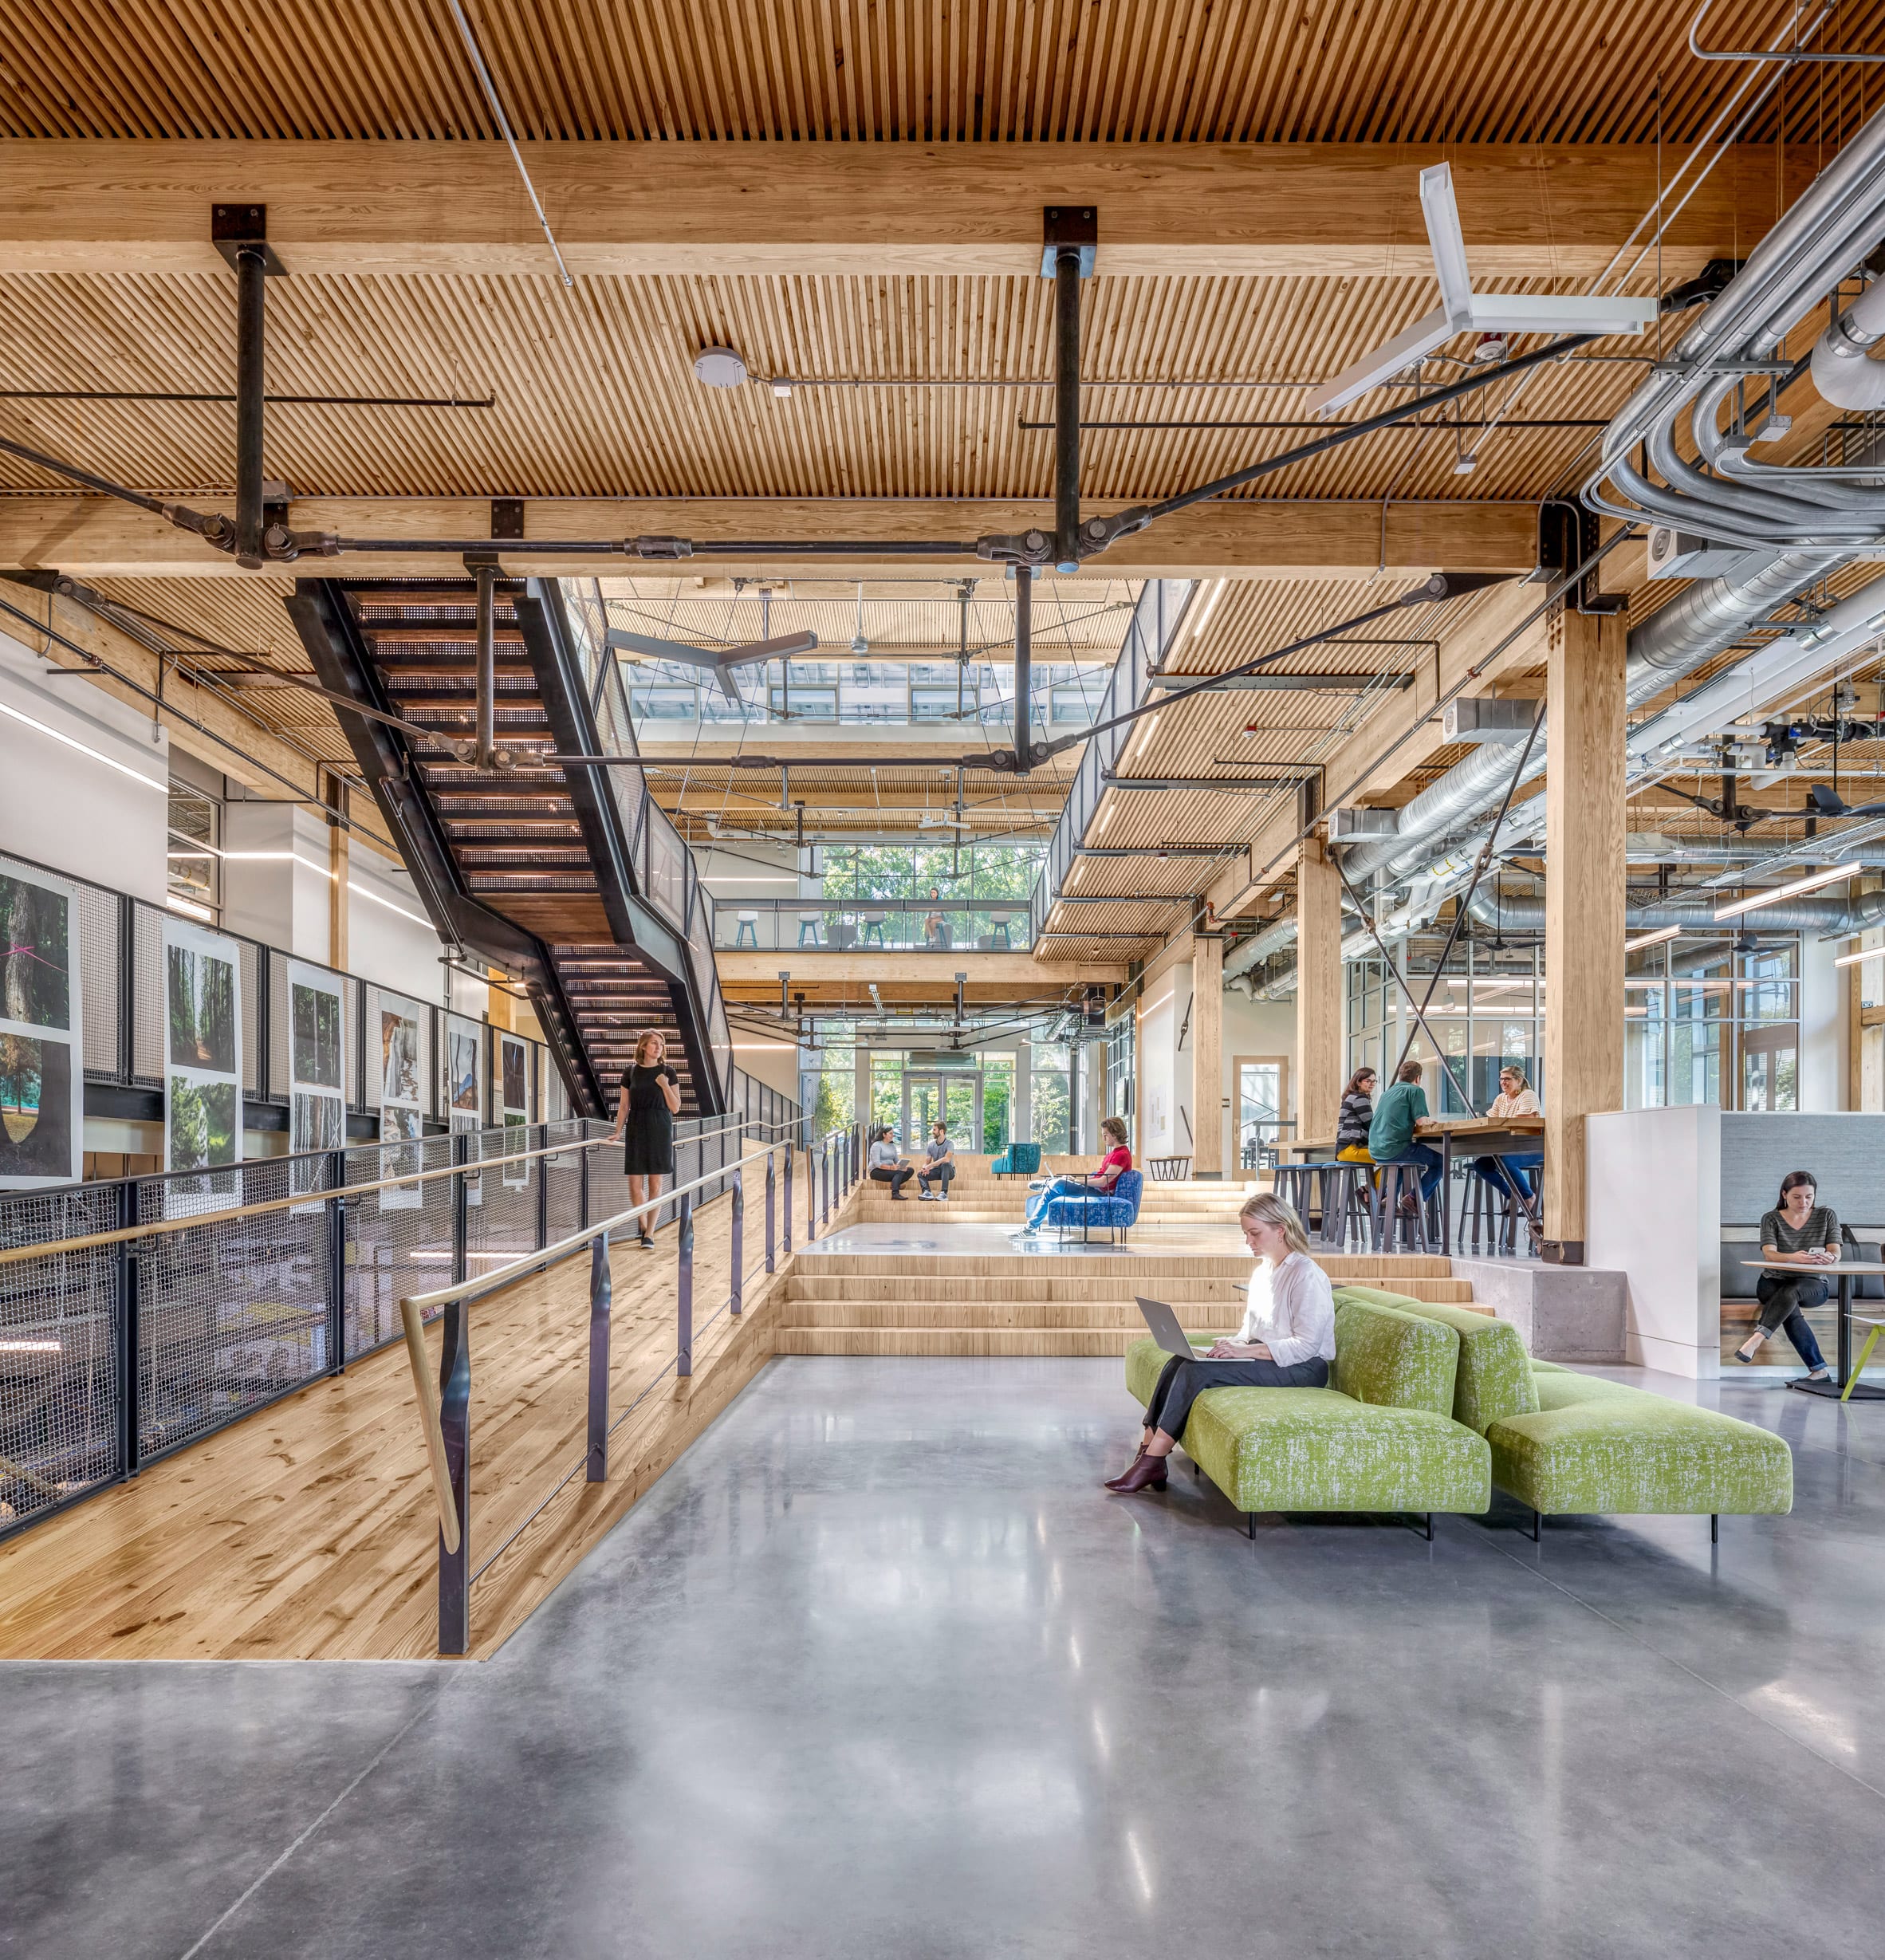 Wood forms interior spaces in the regenerative building